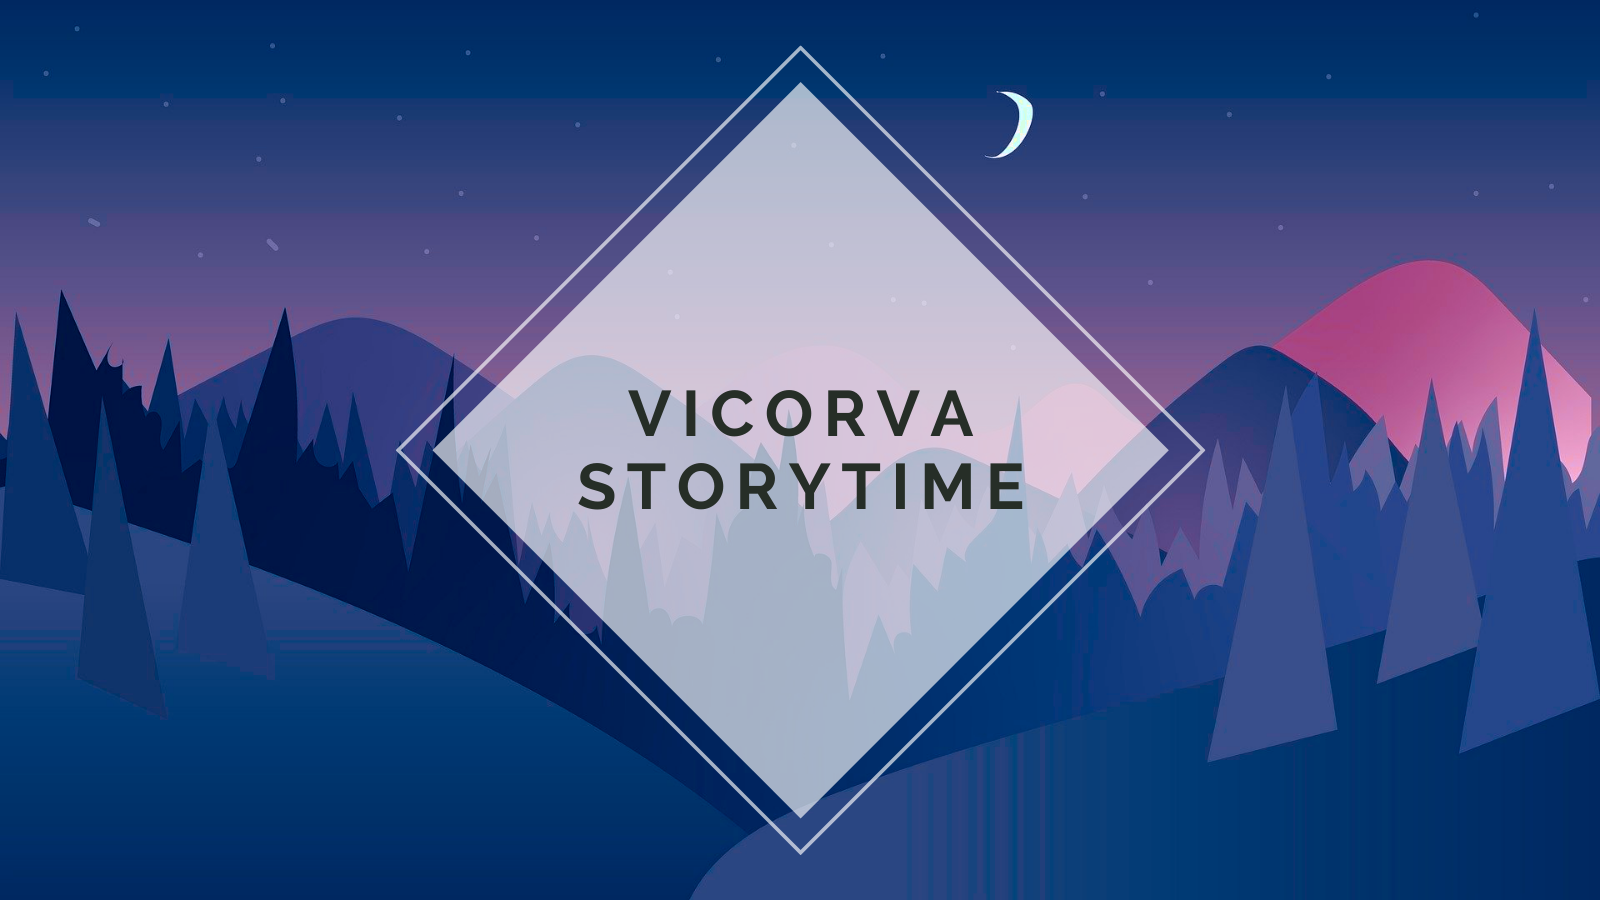 When Online and Offline Merge: Not Quite A #VicorvaStorytime